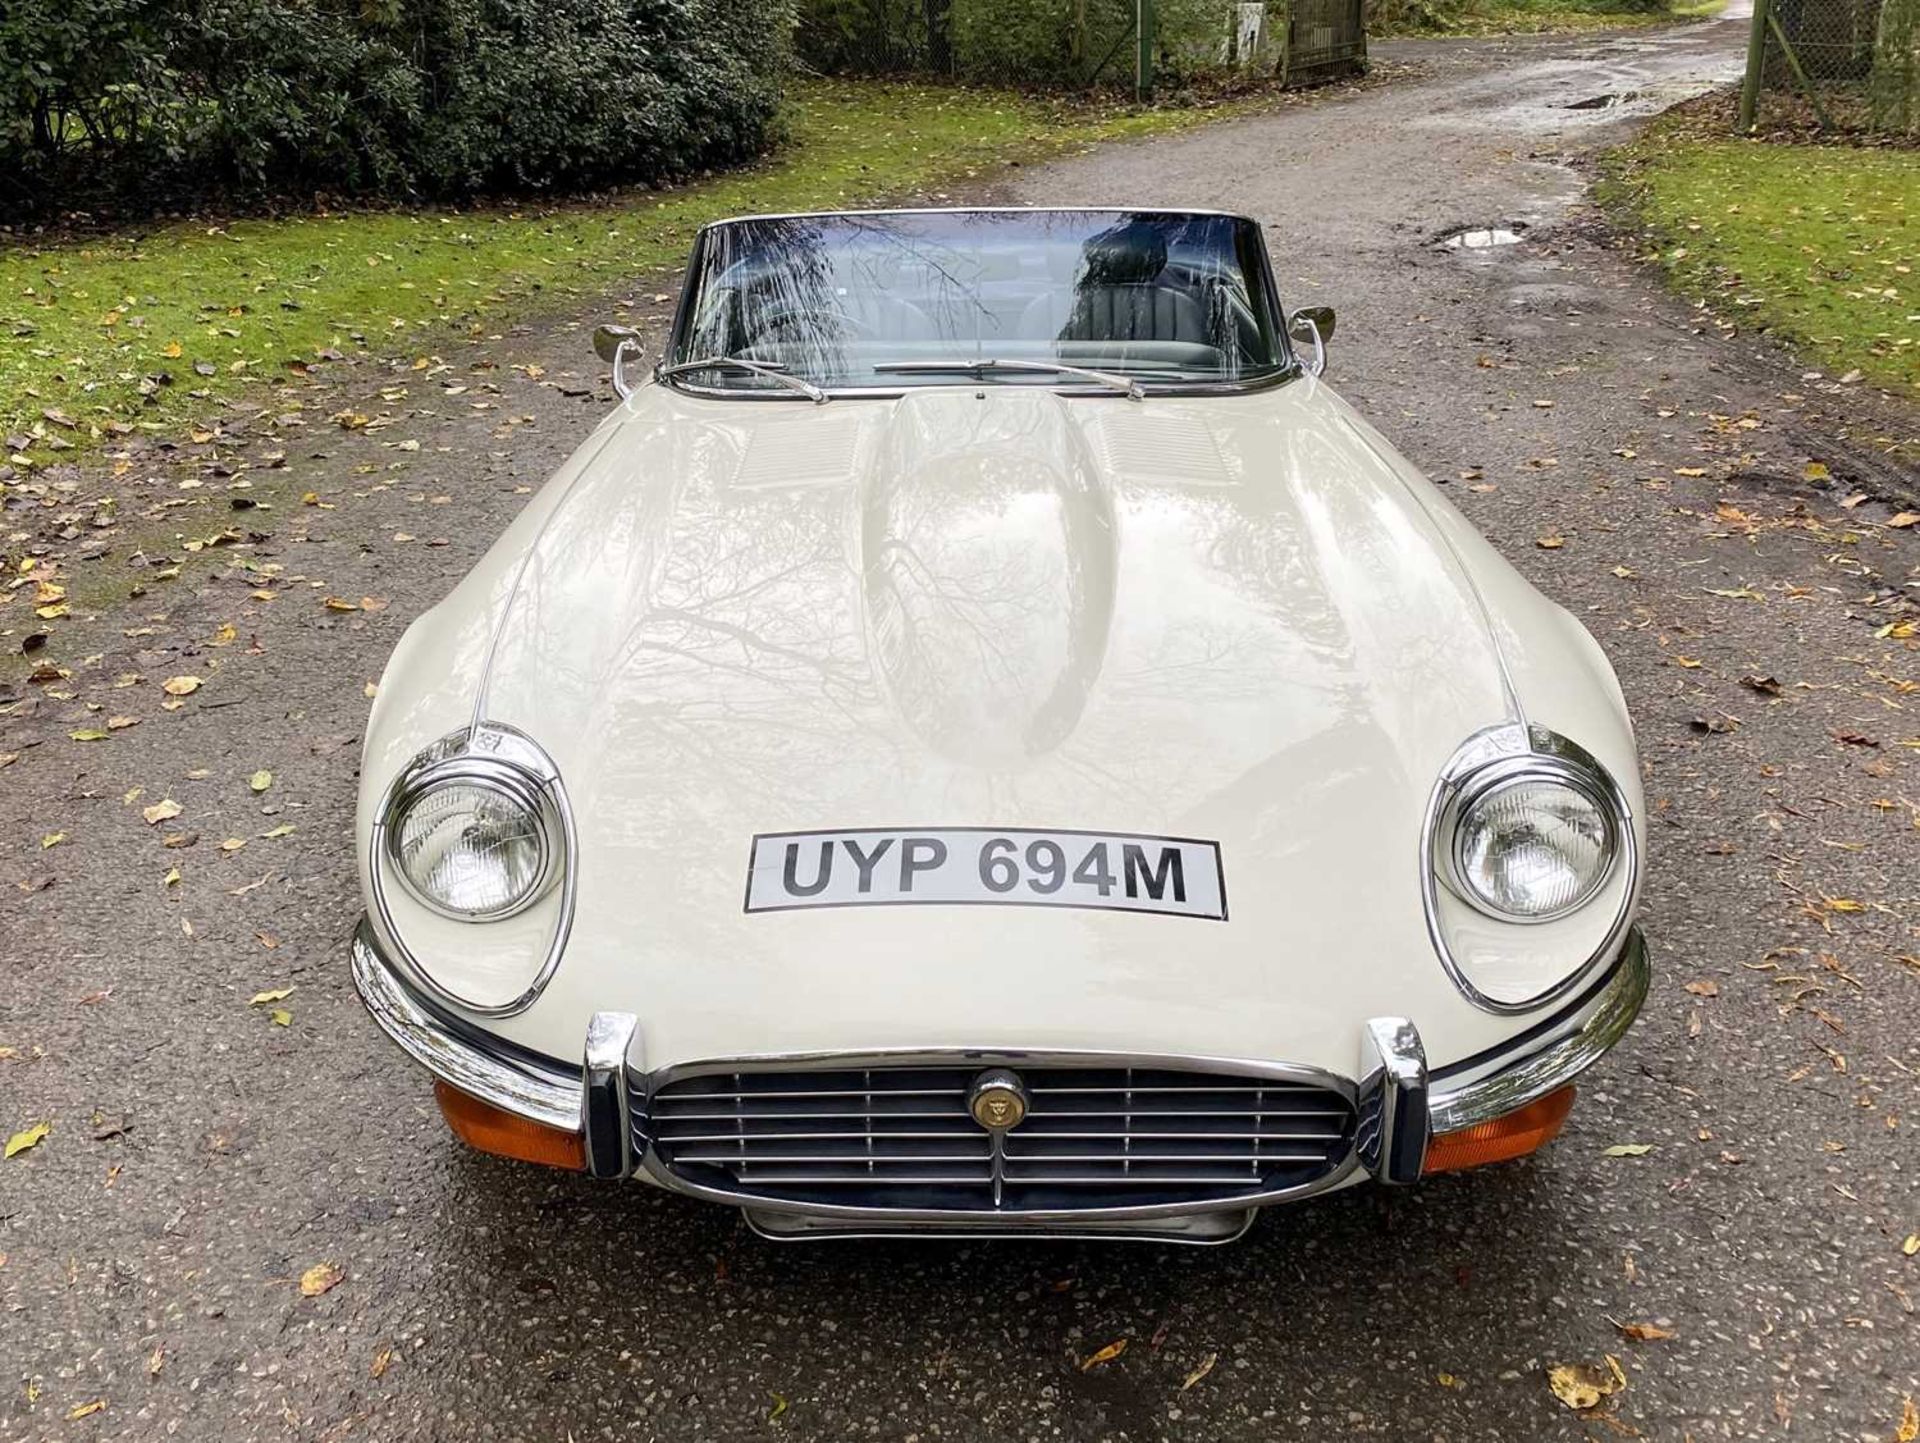 1973 Jaguar E-Type V12 Roadster As seen in Only Fools and Horses - Image 26 of 105